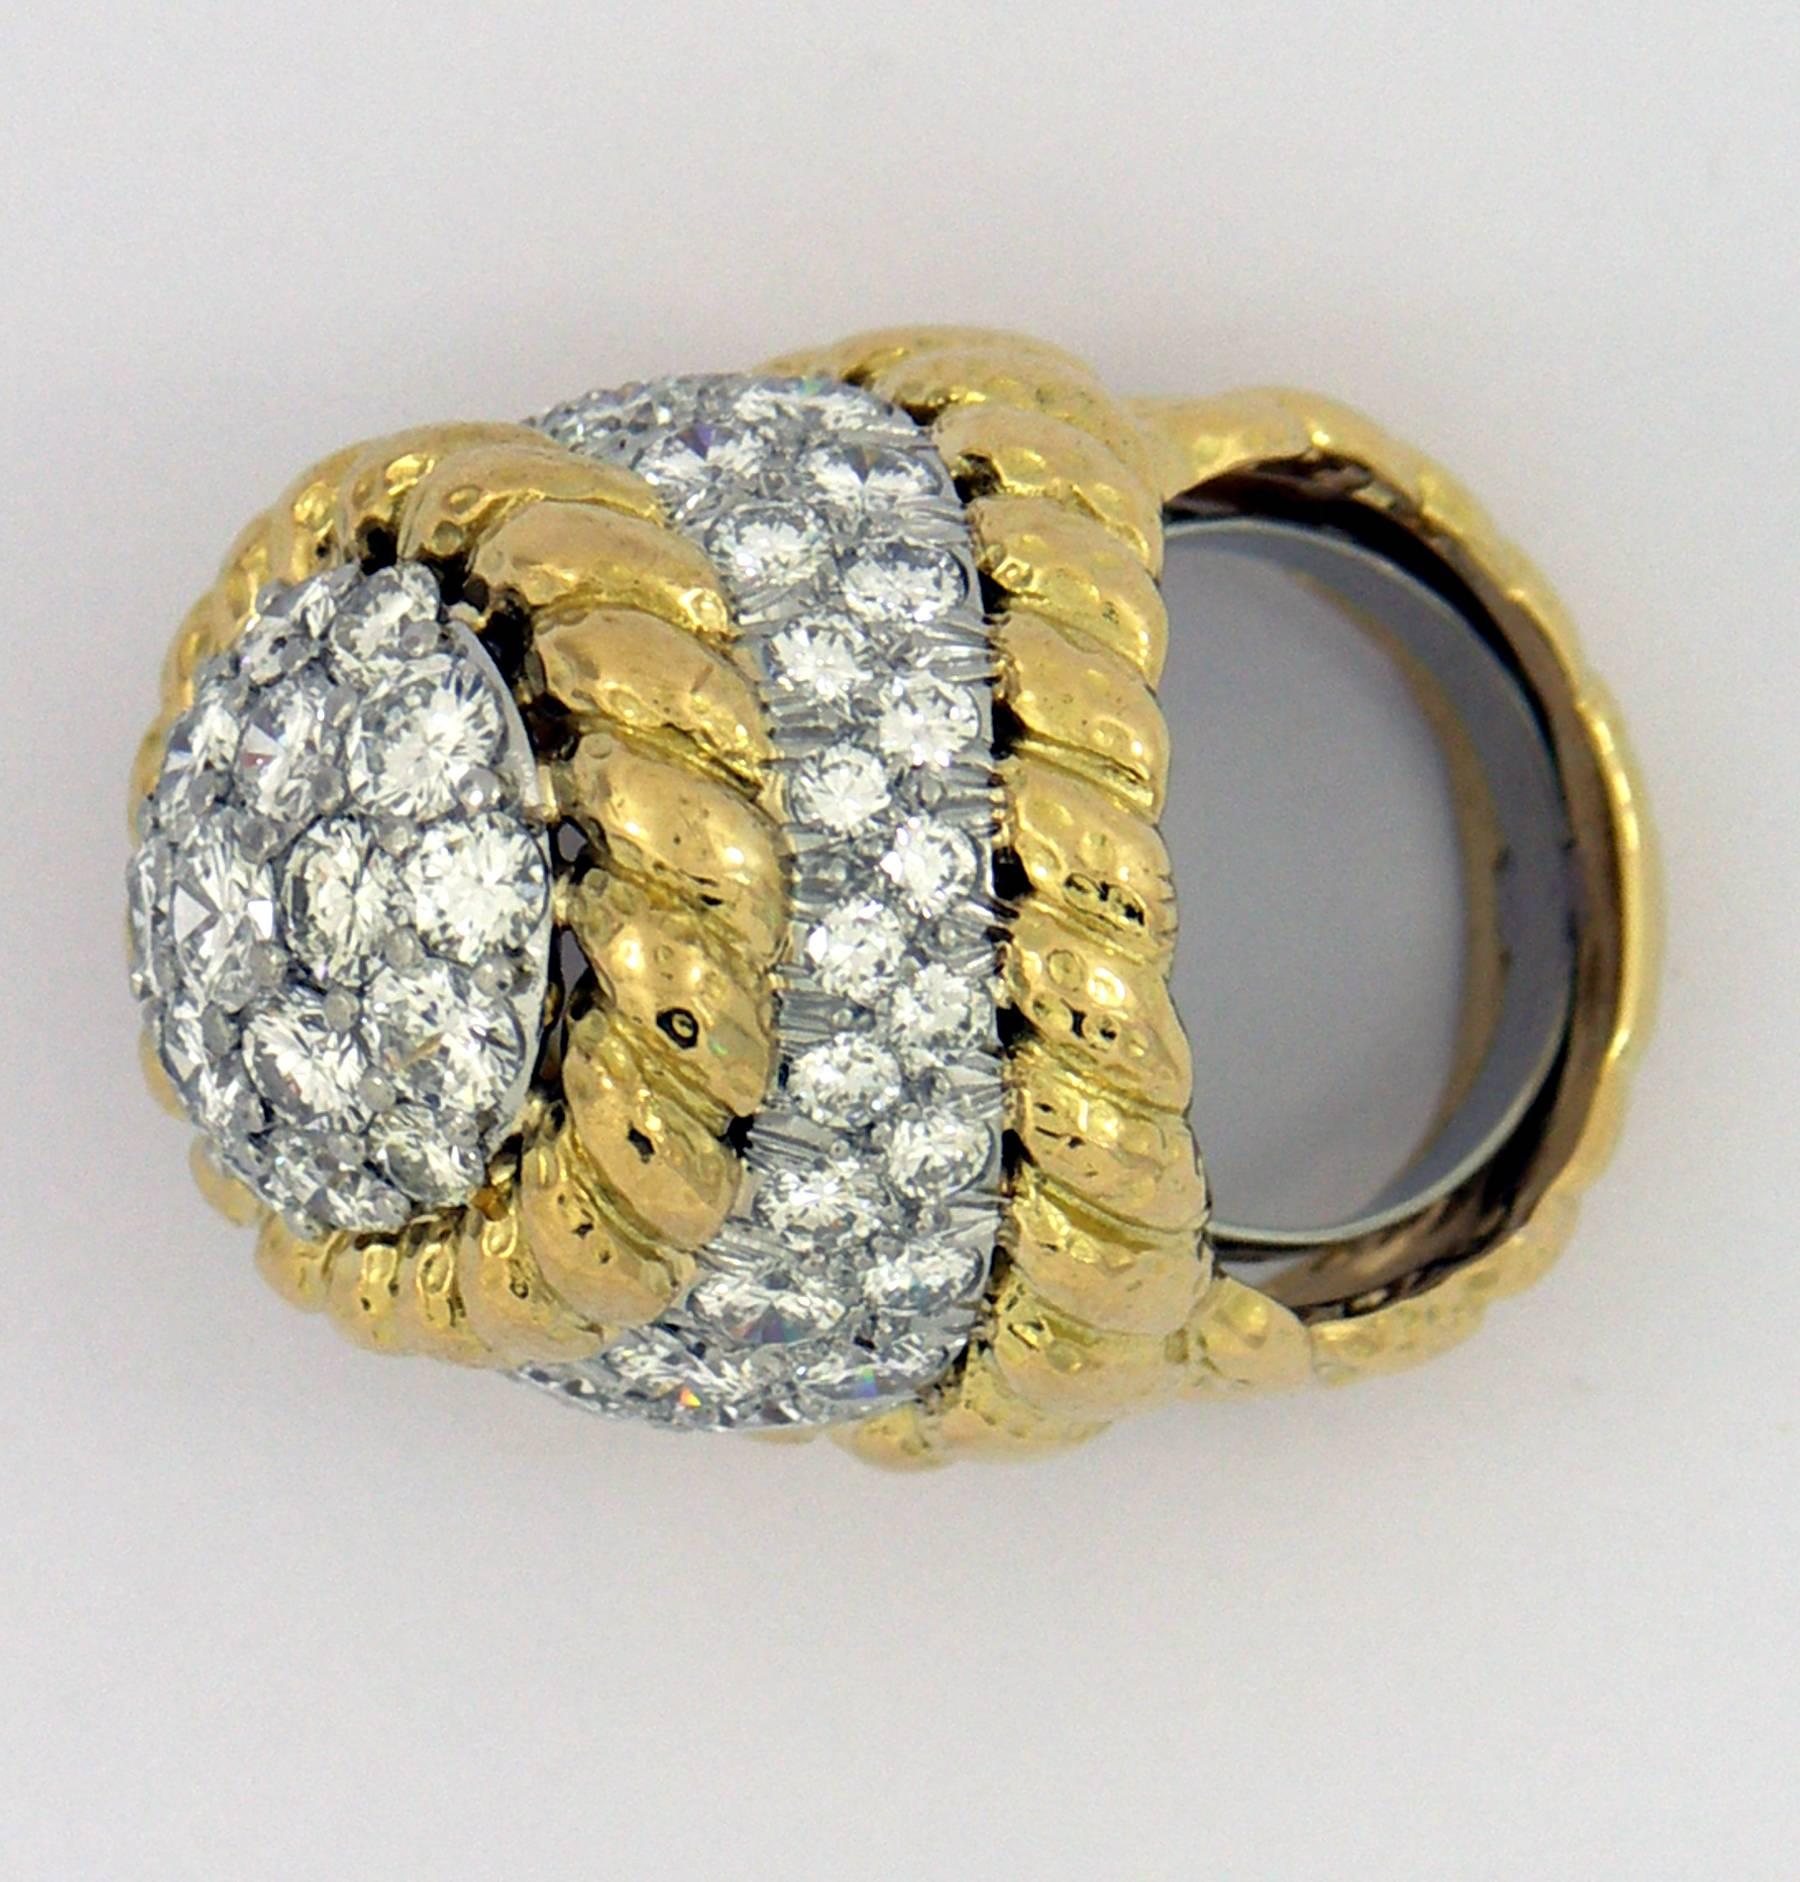 A grand scale ring by David Webb, comprised of an 18K yellow gold frame of twisted rope design, and platinum galleries. It is set with approximately 6ct of overall F color, and VS1 clarity diamonds.
Ring Size 6 1/2